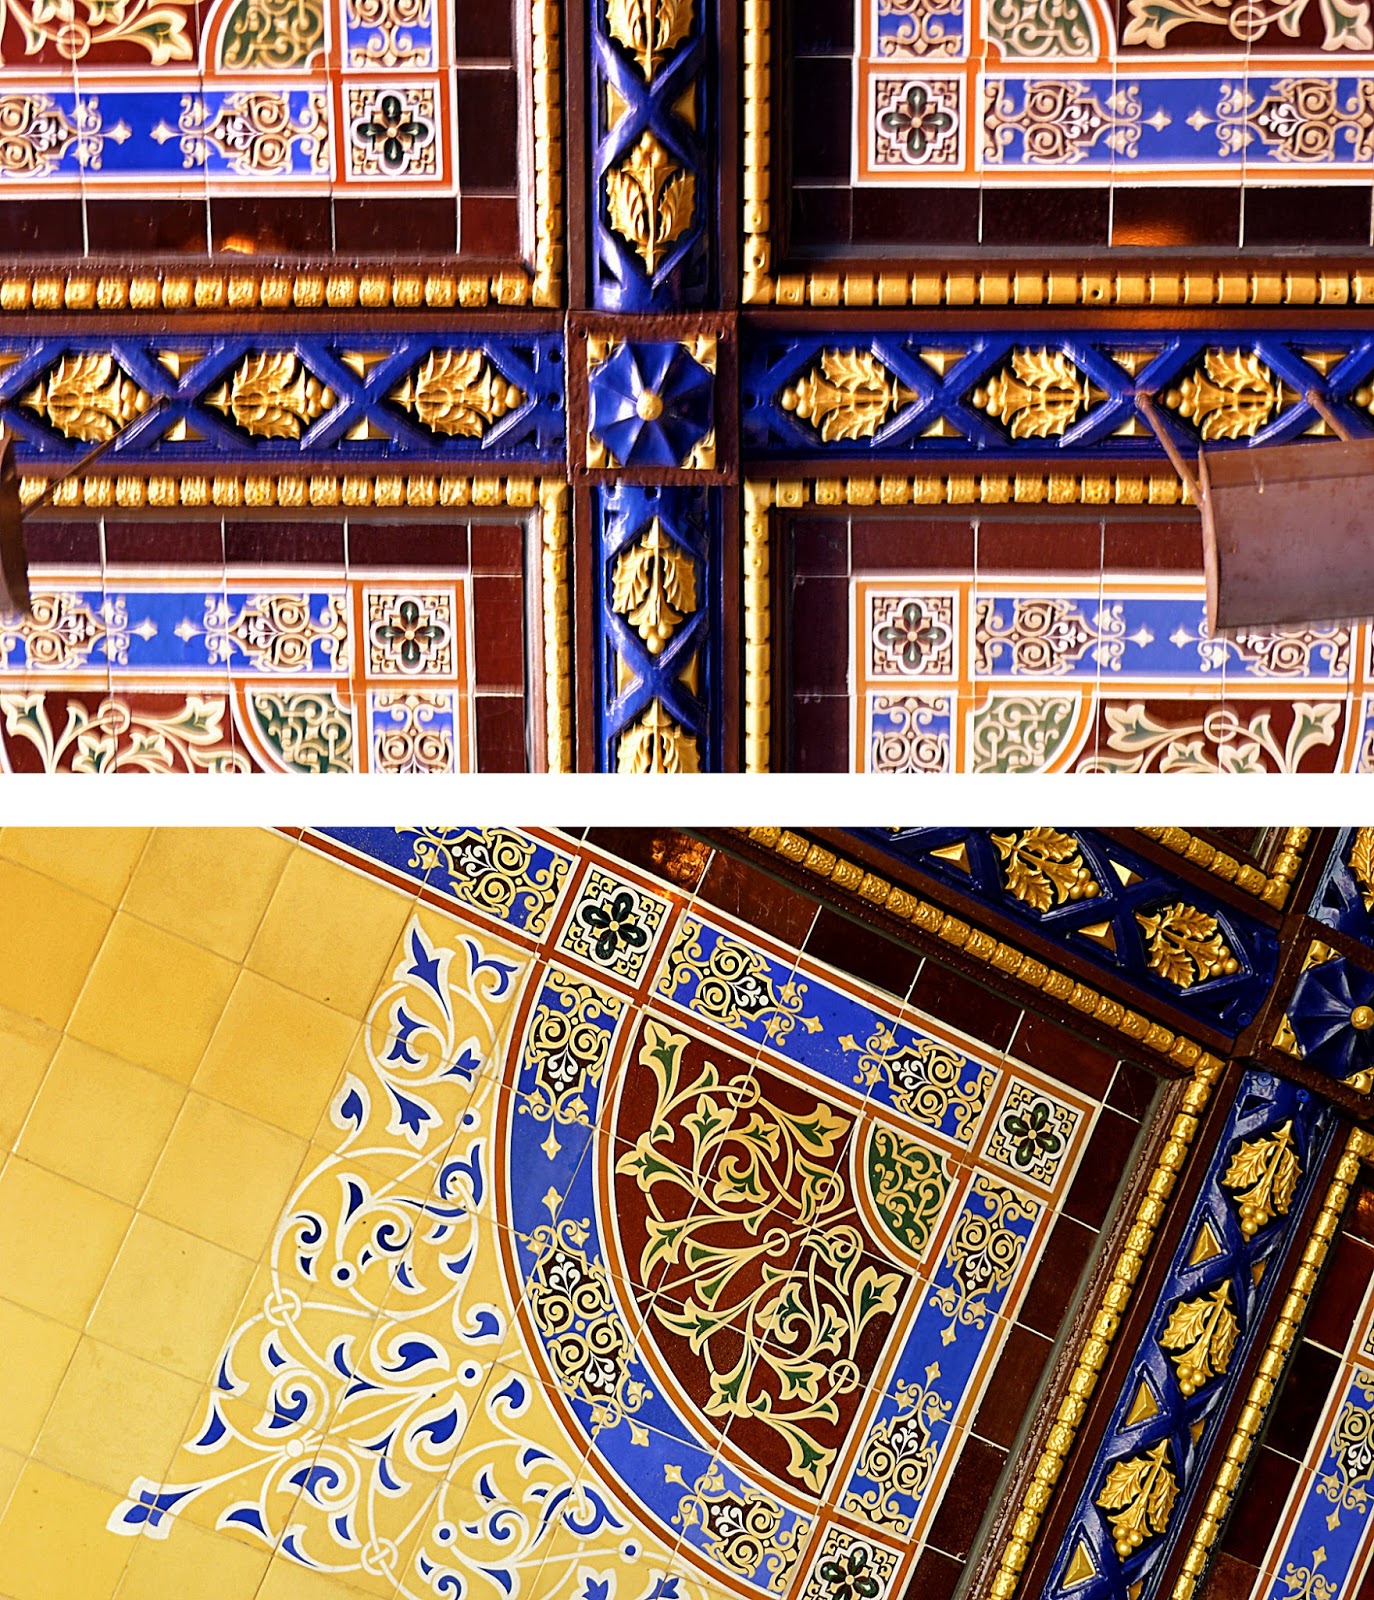 ARCHITECTURAL TILES, GLASS AND ORNAMENTATION IN NEW YORK: The Heart of the  Park: Bethesda Terrace and its suspended Minton Tile ceiling